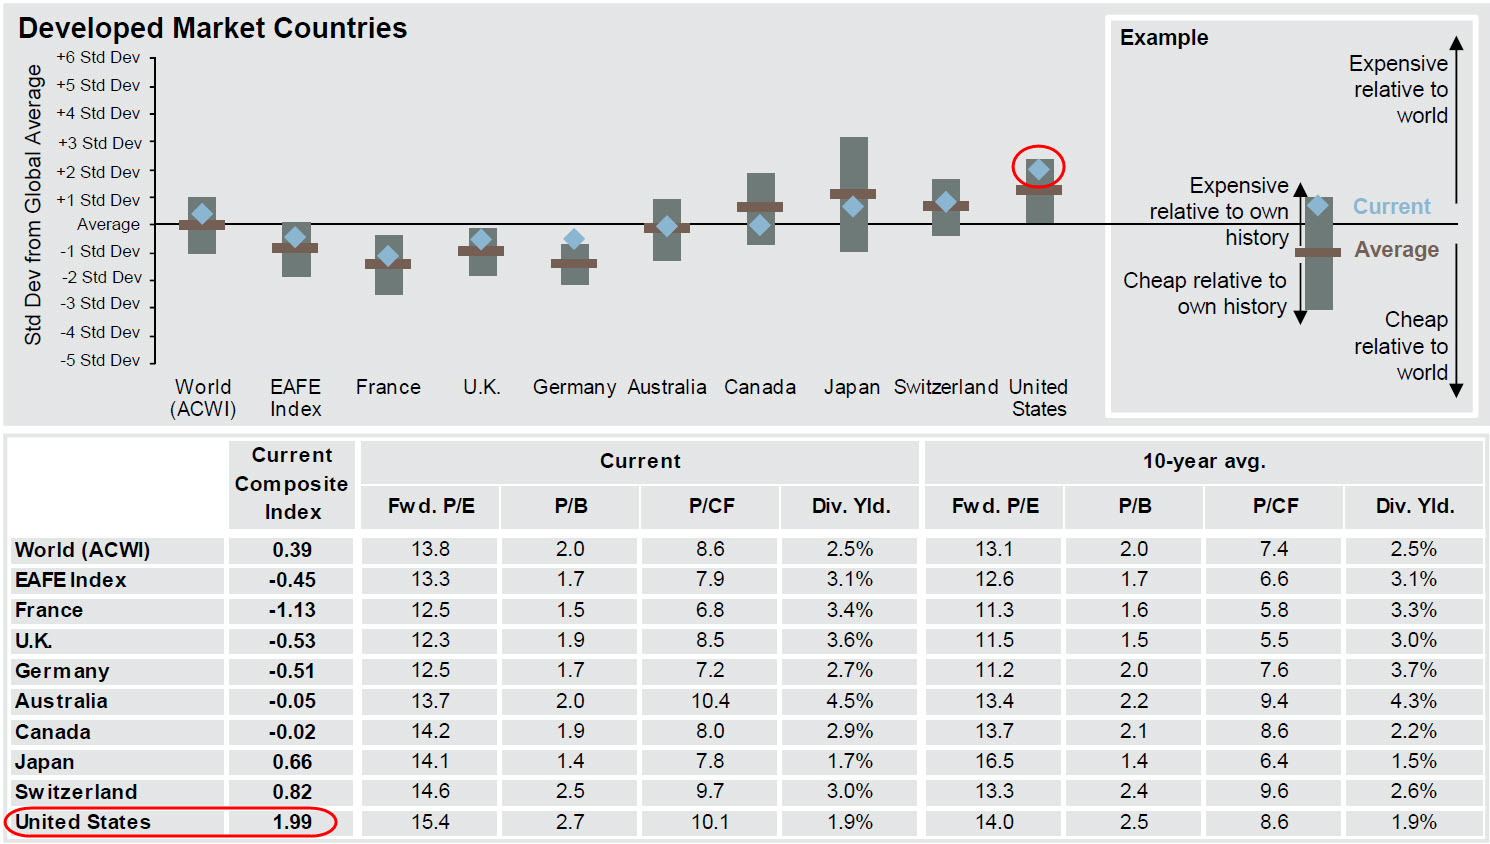 Developed Market Countries - Global Average Expenses